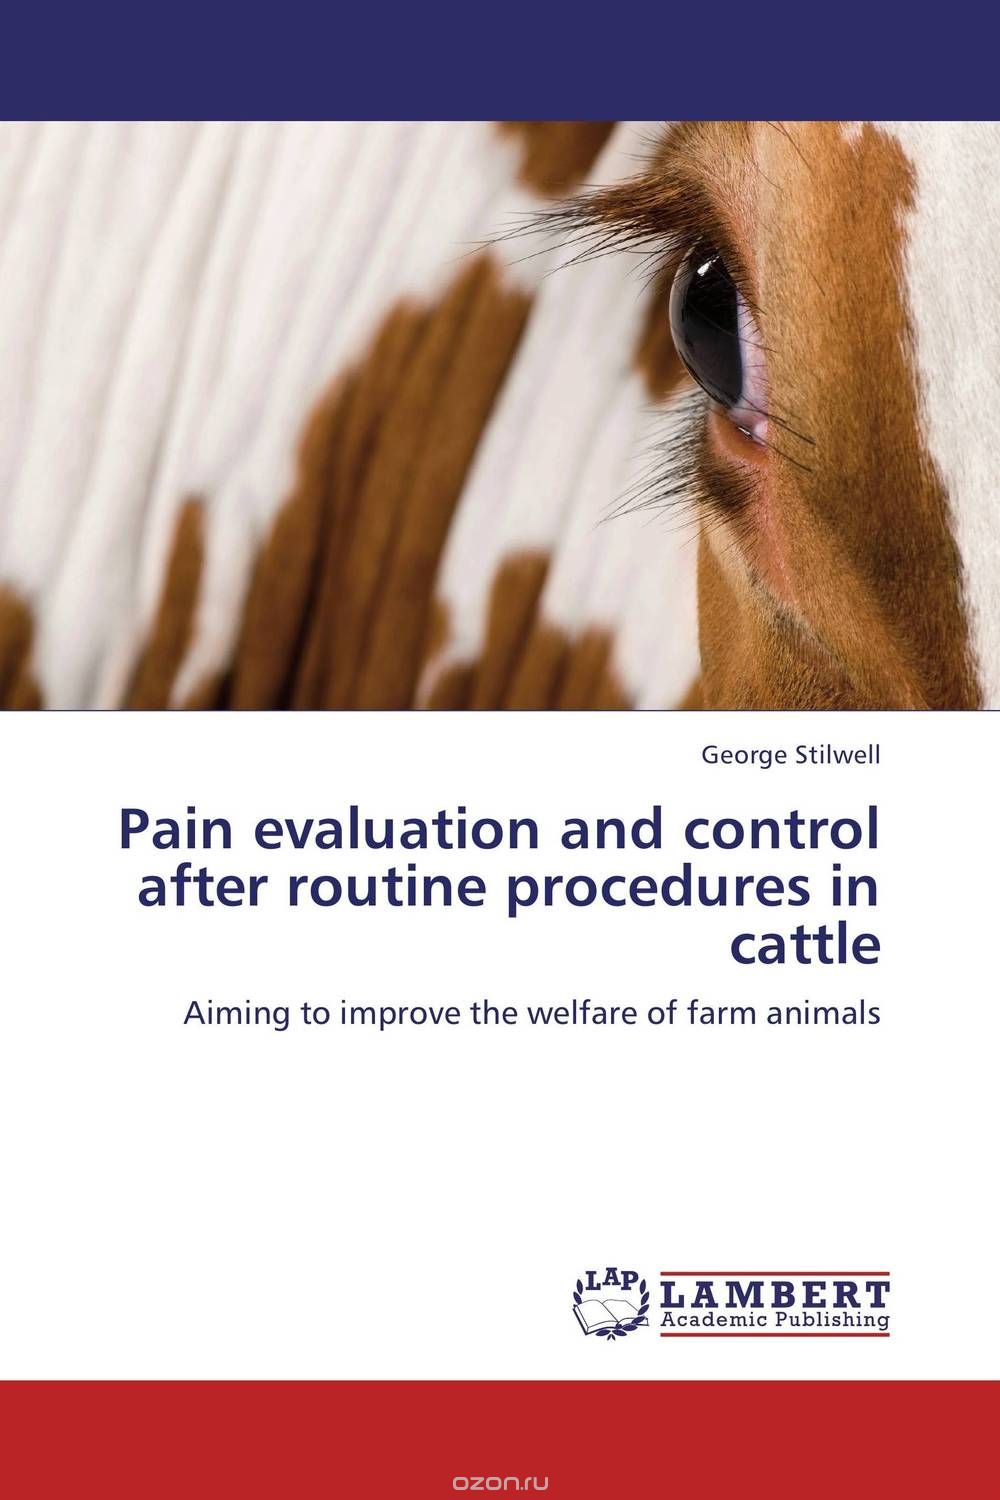 Скачать книгу "Pain evaluation and control after routine procedures in cattle"